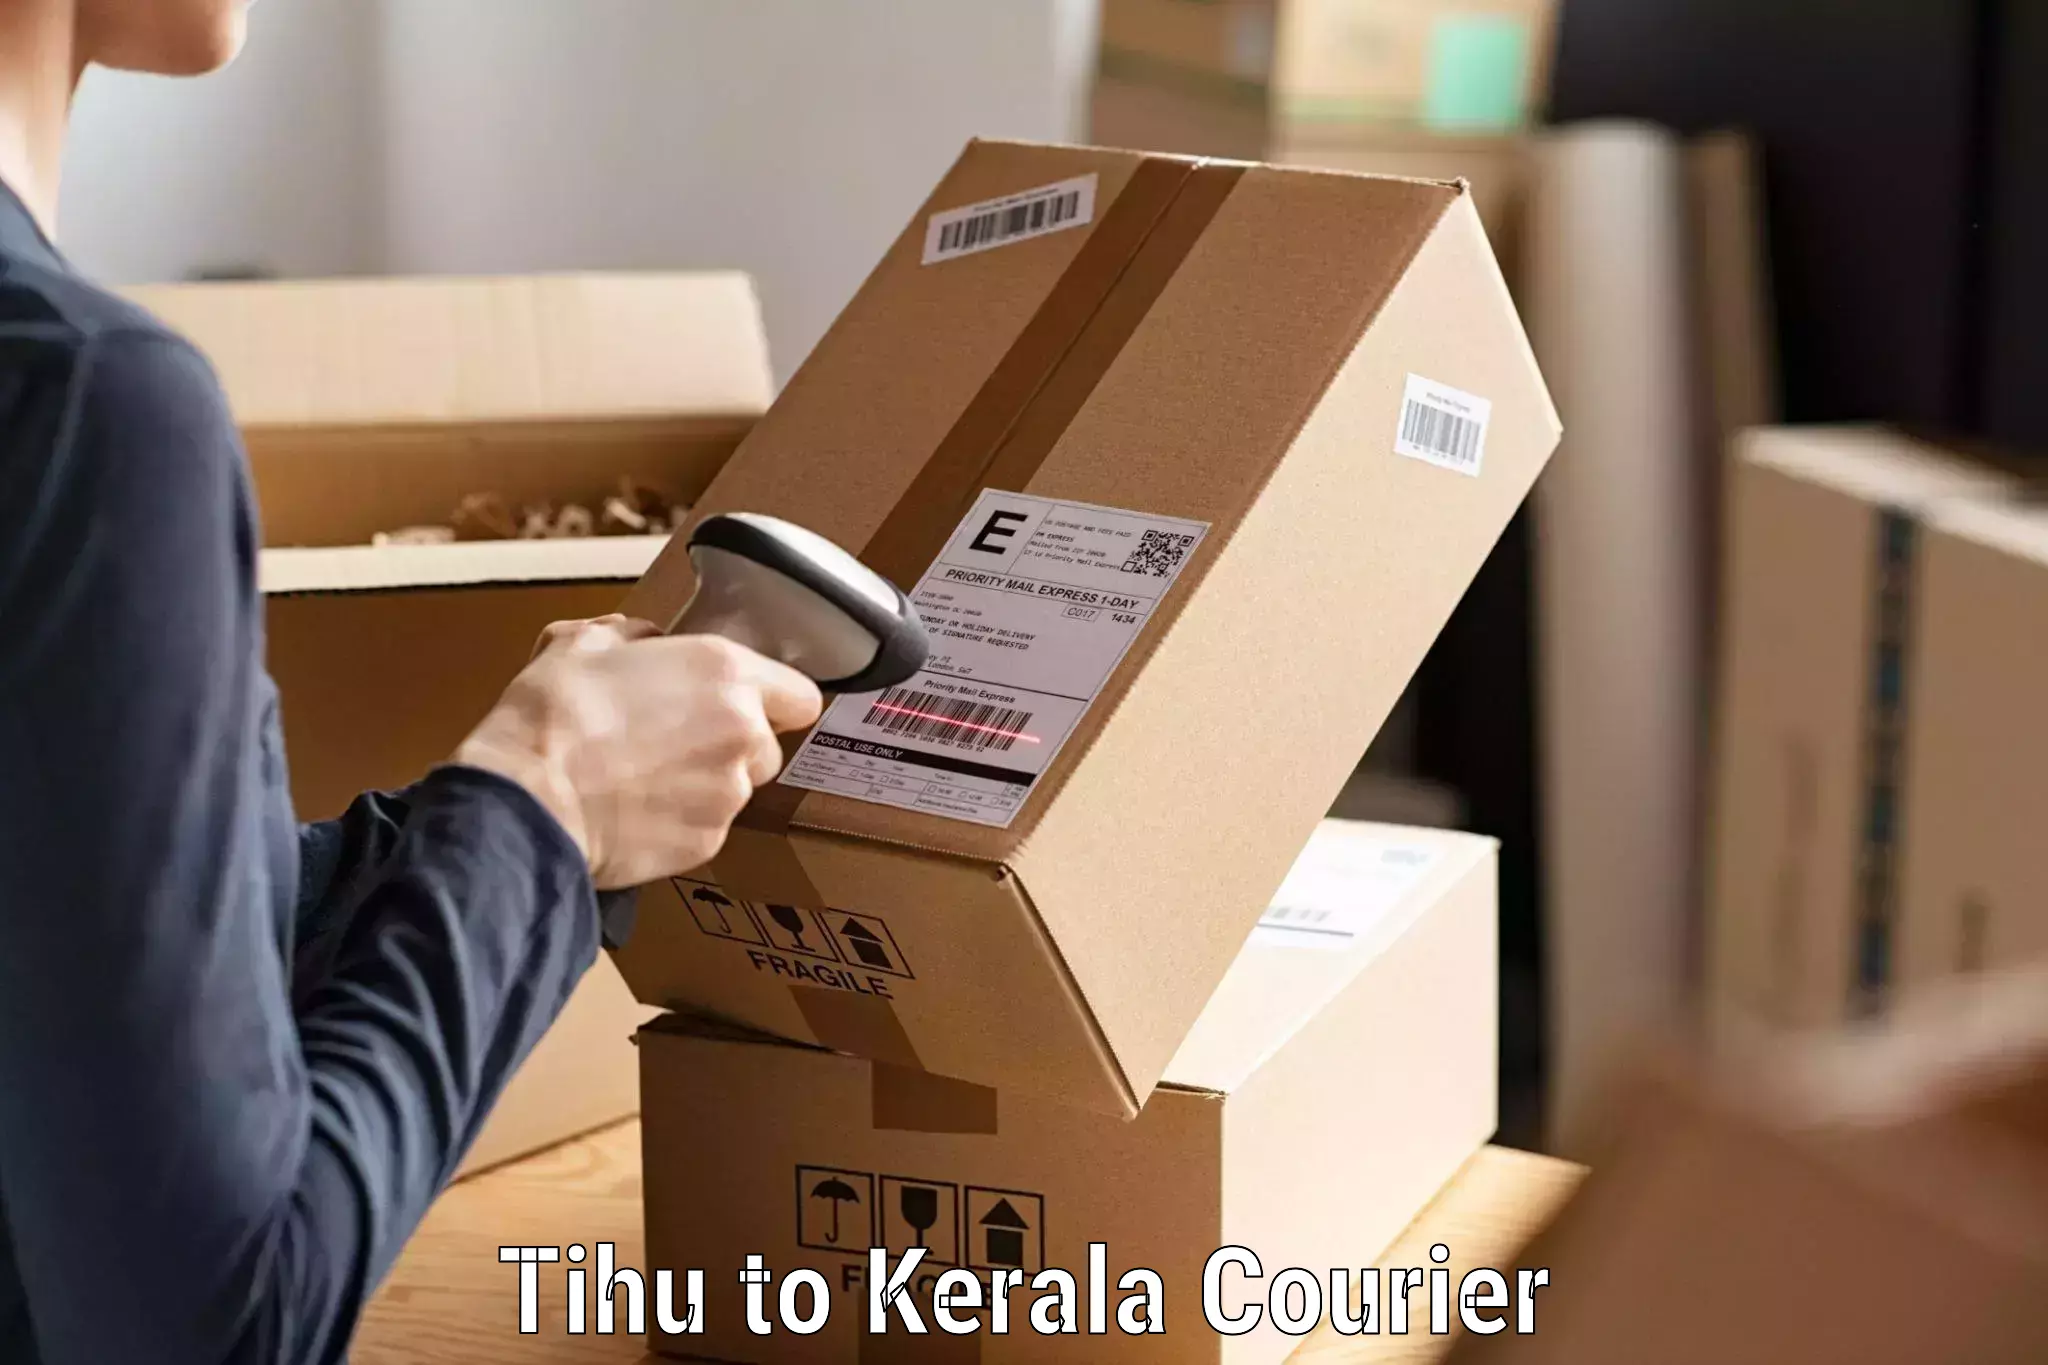 Express delivery capabilities Tihu to Kerala